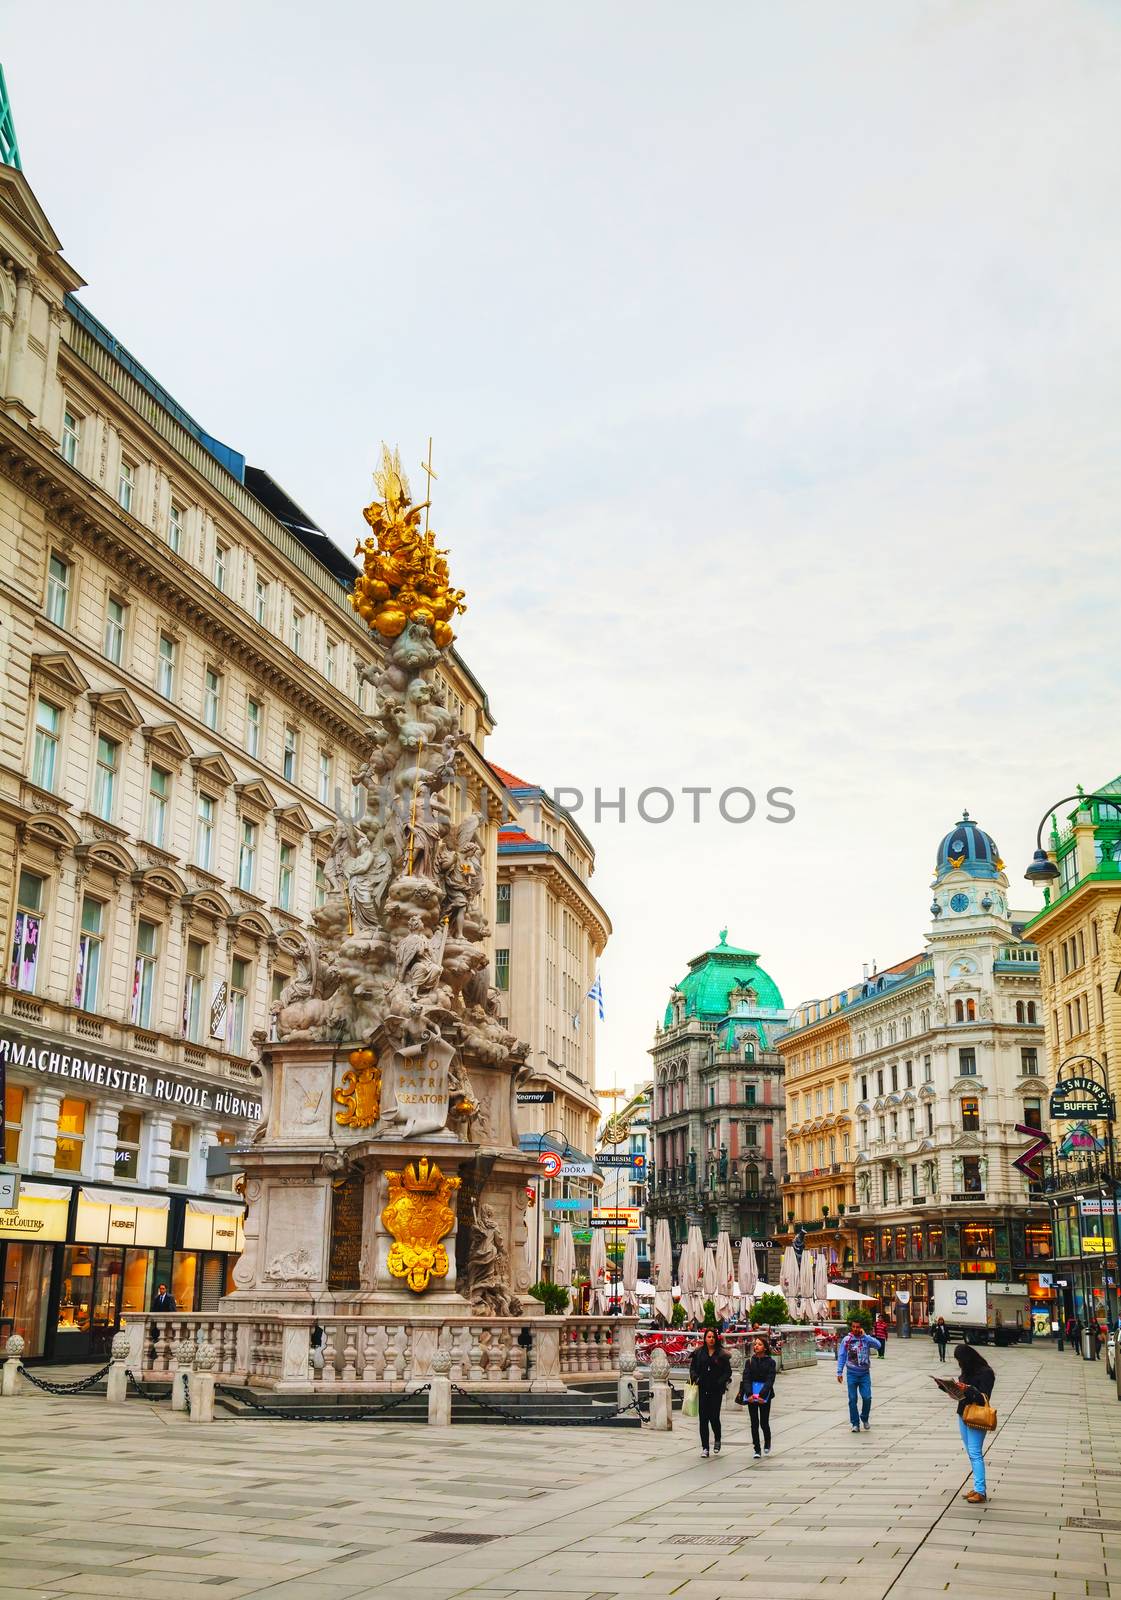 The Pestsaule (Plague Column) at Graben street in Vienna by AndreyKr